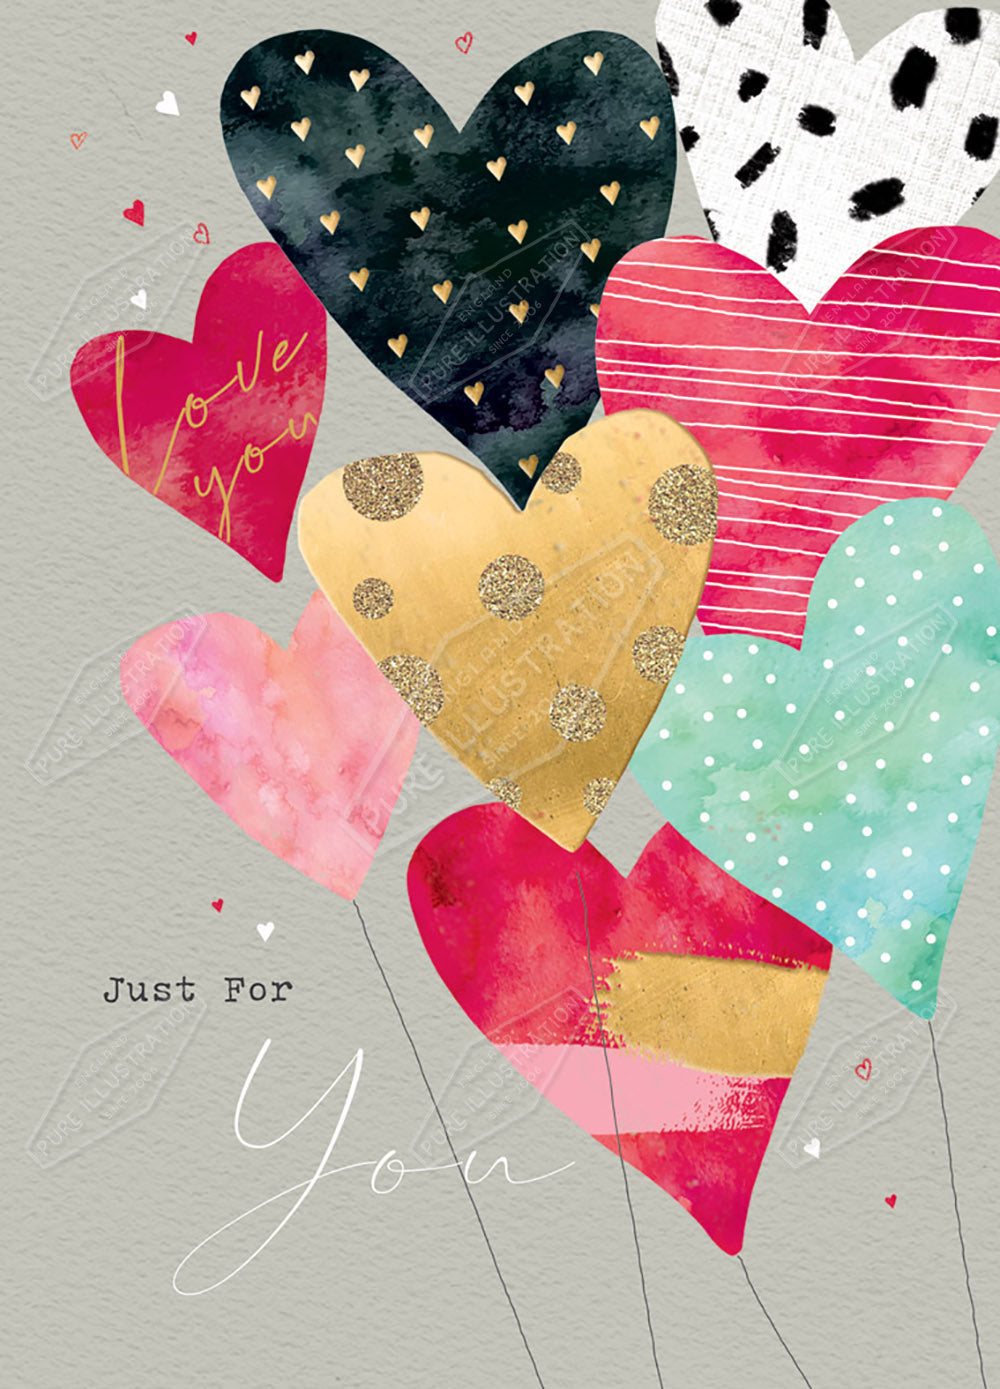 Valentines Balloons / Anniversary Greeting Card Design by Cory Reid - Pure Art Licensing Agency & Surface Design Studio